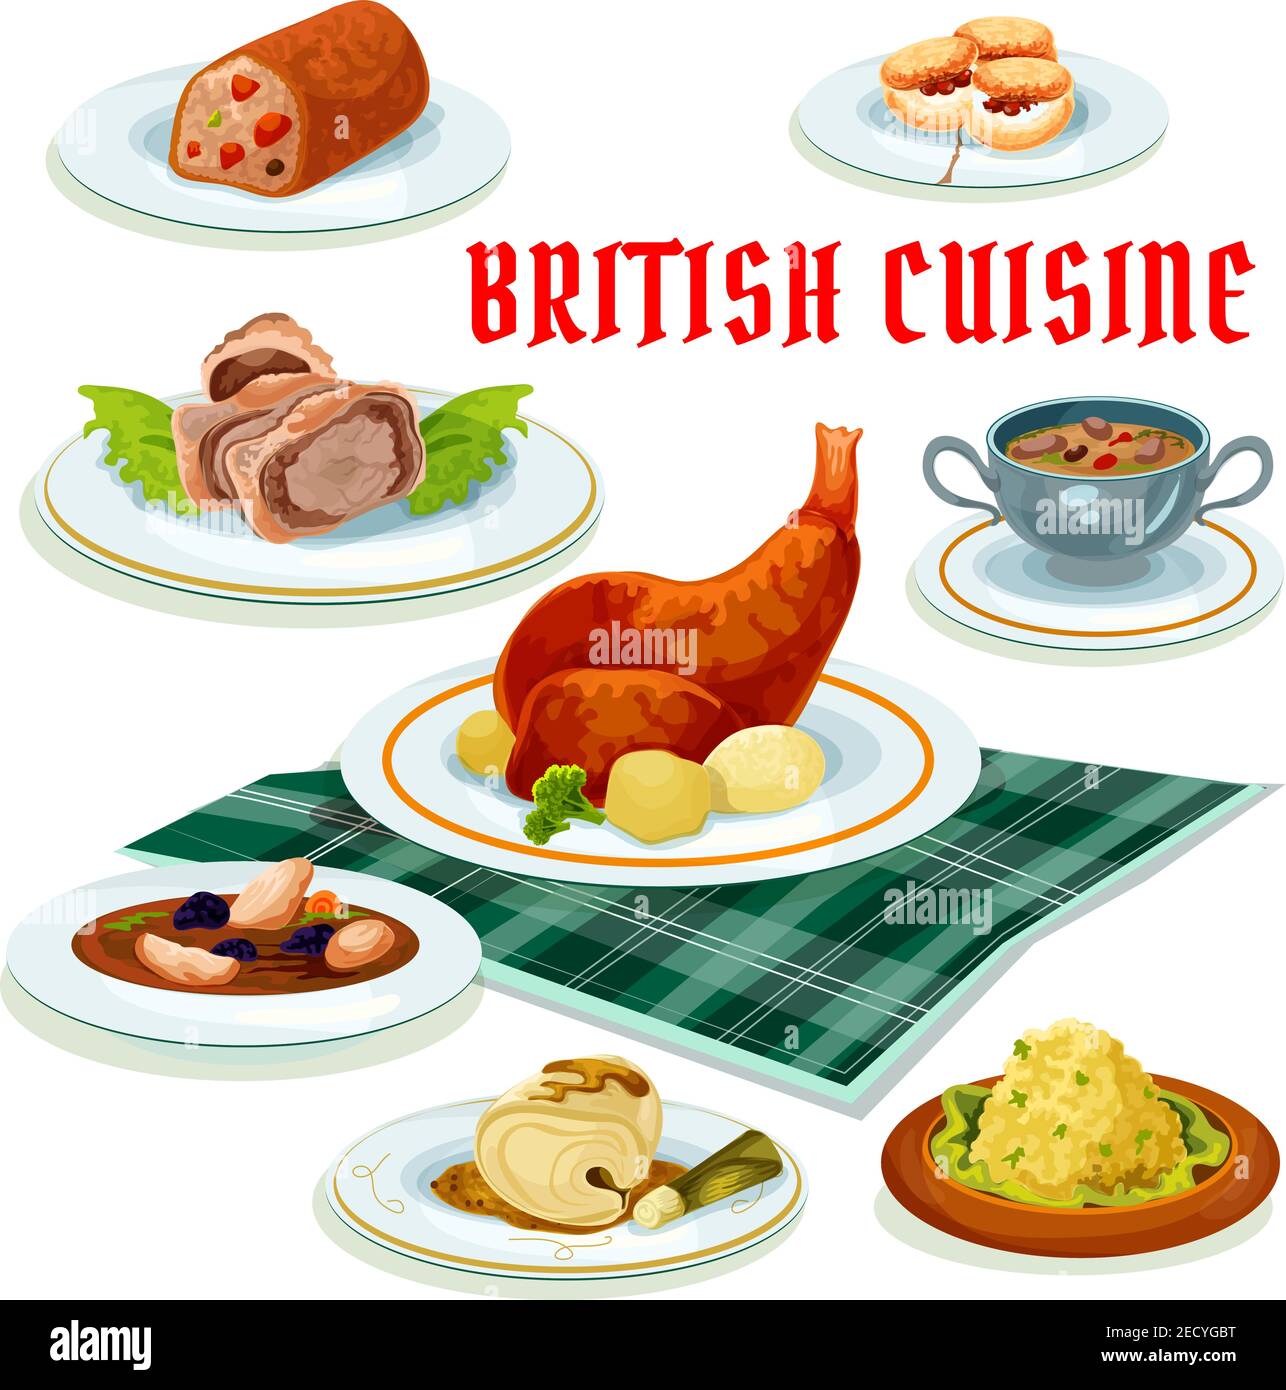 British cuisine menu cartoon icon with beef wellington in pastry, scones, fruit cake, baked rabbit, cod in mustard sauce, scottish chicken soup with p Stock Vector